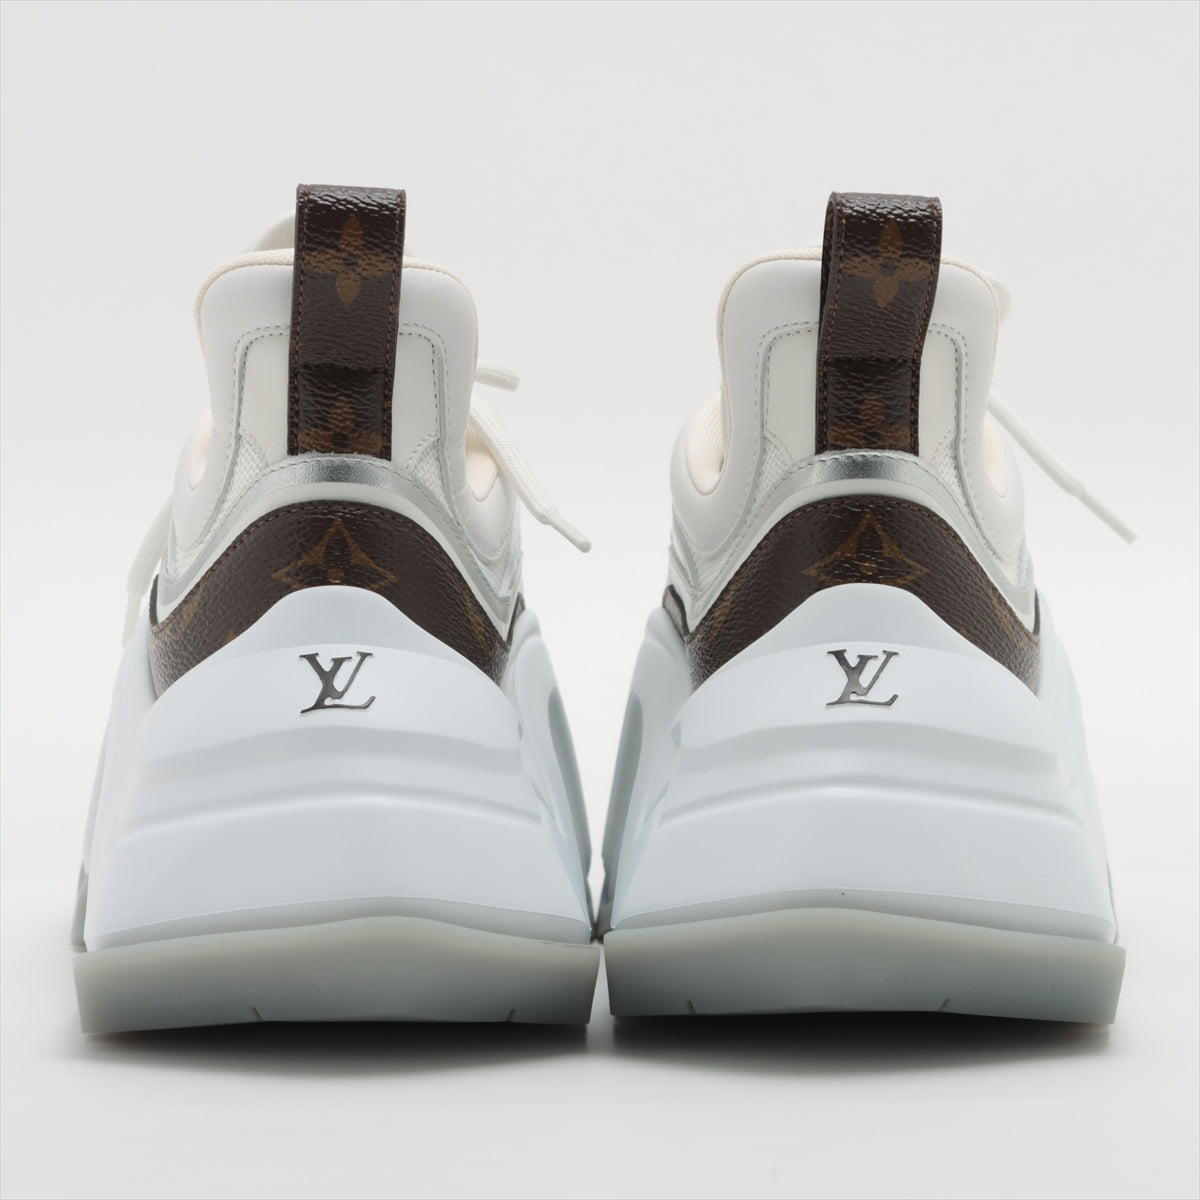 Louis Vuitton 23 years Leather x mesh Sneakers 34 1/2 Ladies' White x brown Arclight 2.0 line GO0213 Monogram box There is a bag